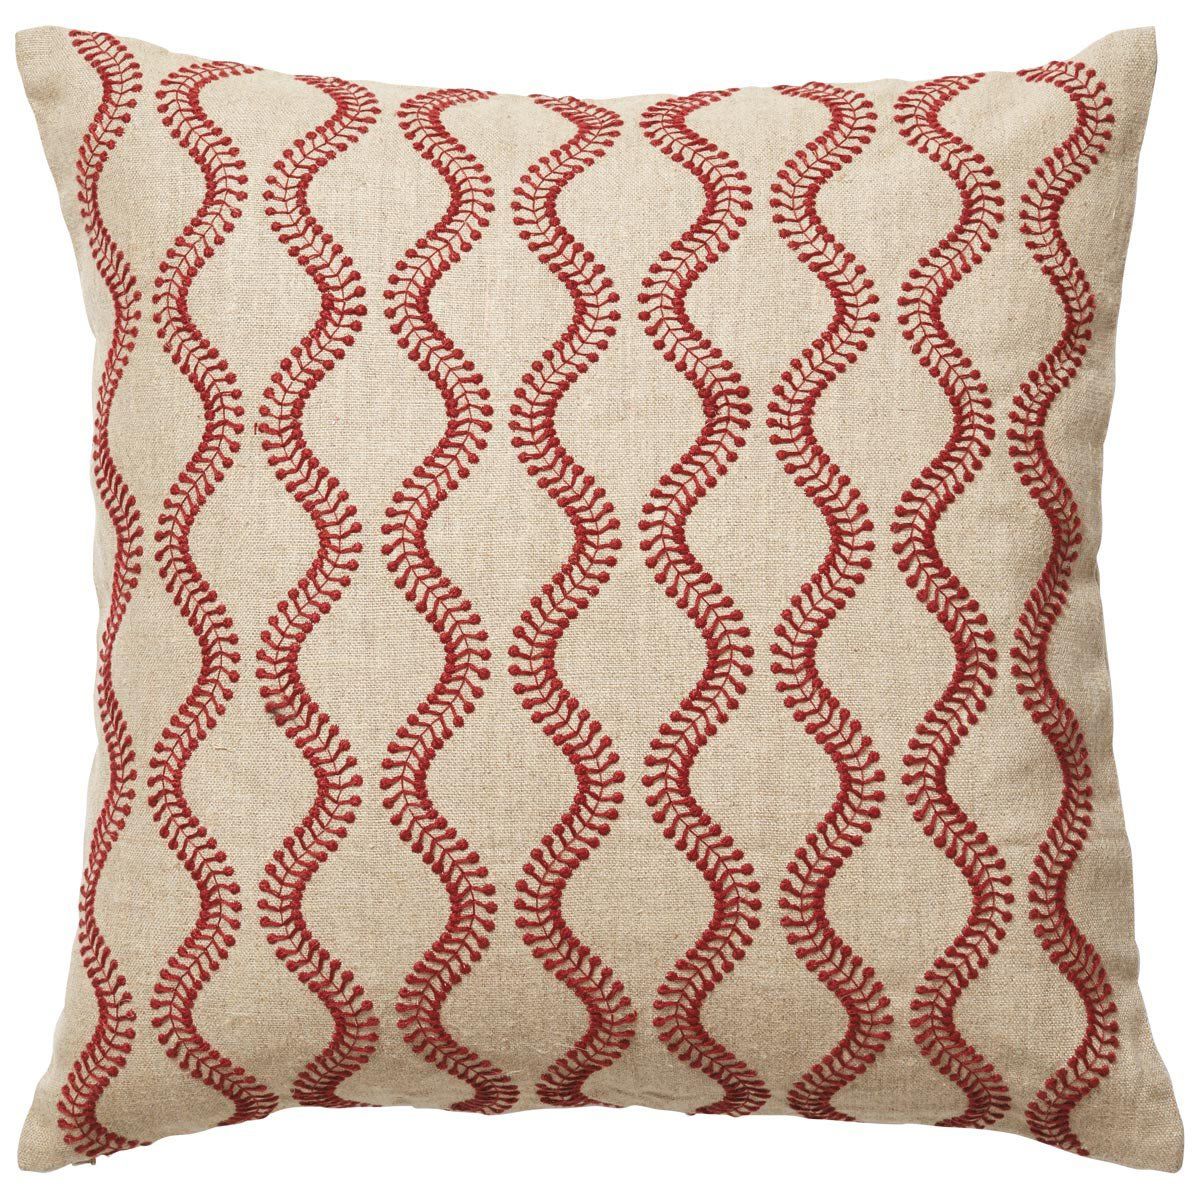 Zostera Pillow Cover - Blood Orange